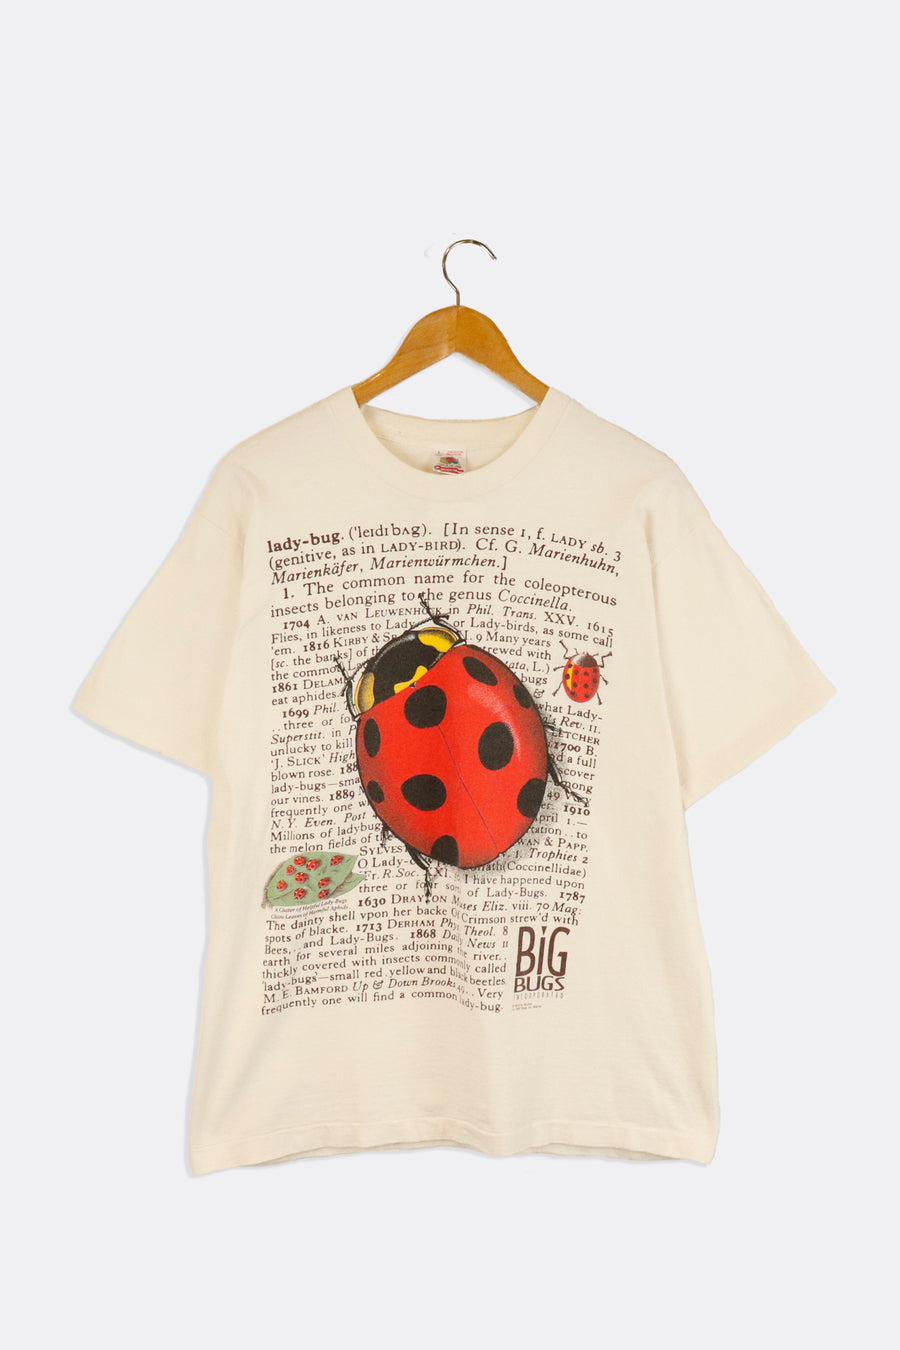 Vintage 1994 Big Bugs Incorporated Lady Bug Graphic Over Top Lady Bug Facts T Shirt Sz L